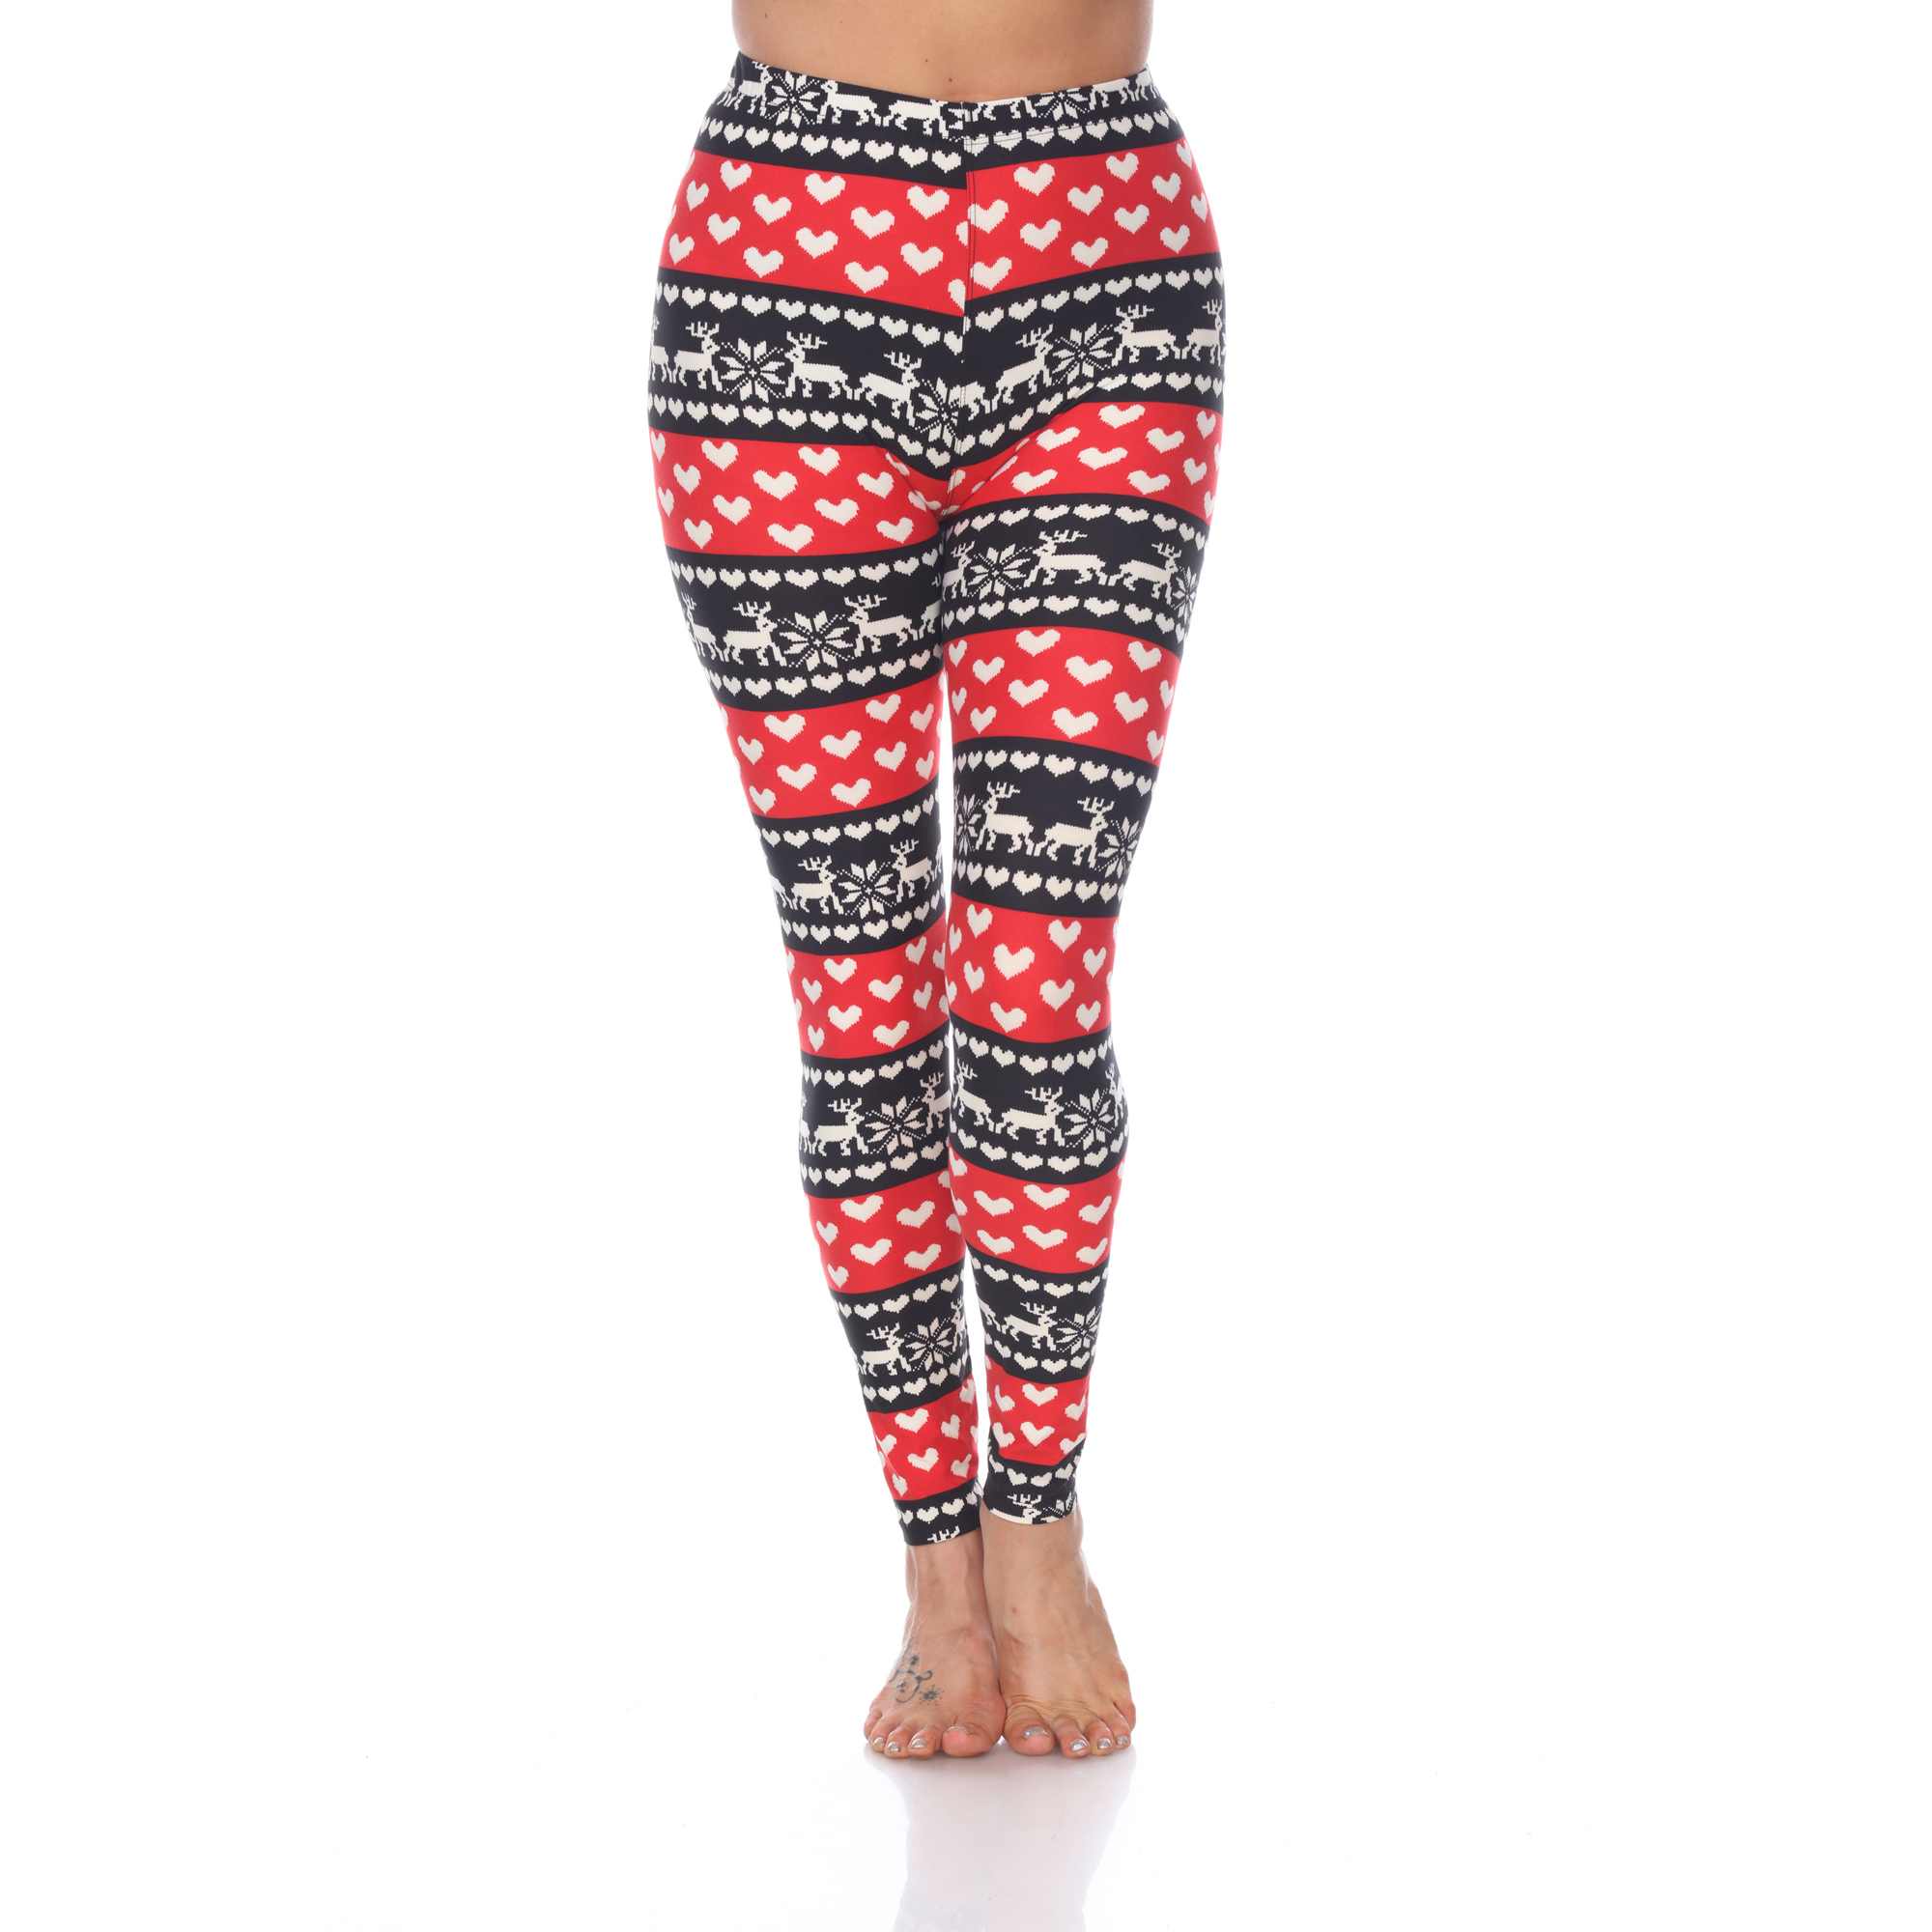 White Mark Women's Holiday Print Stretch Leggings - Brown/Multi, One Size